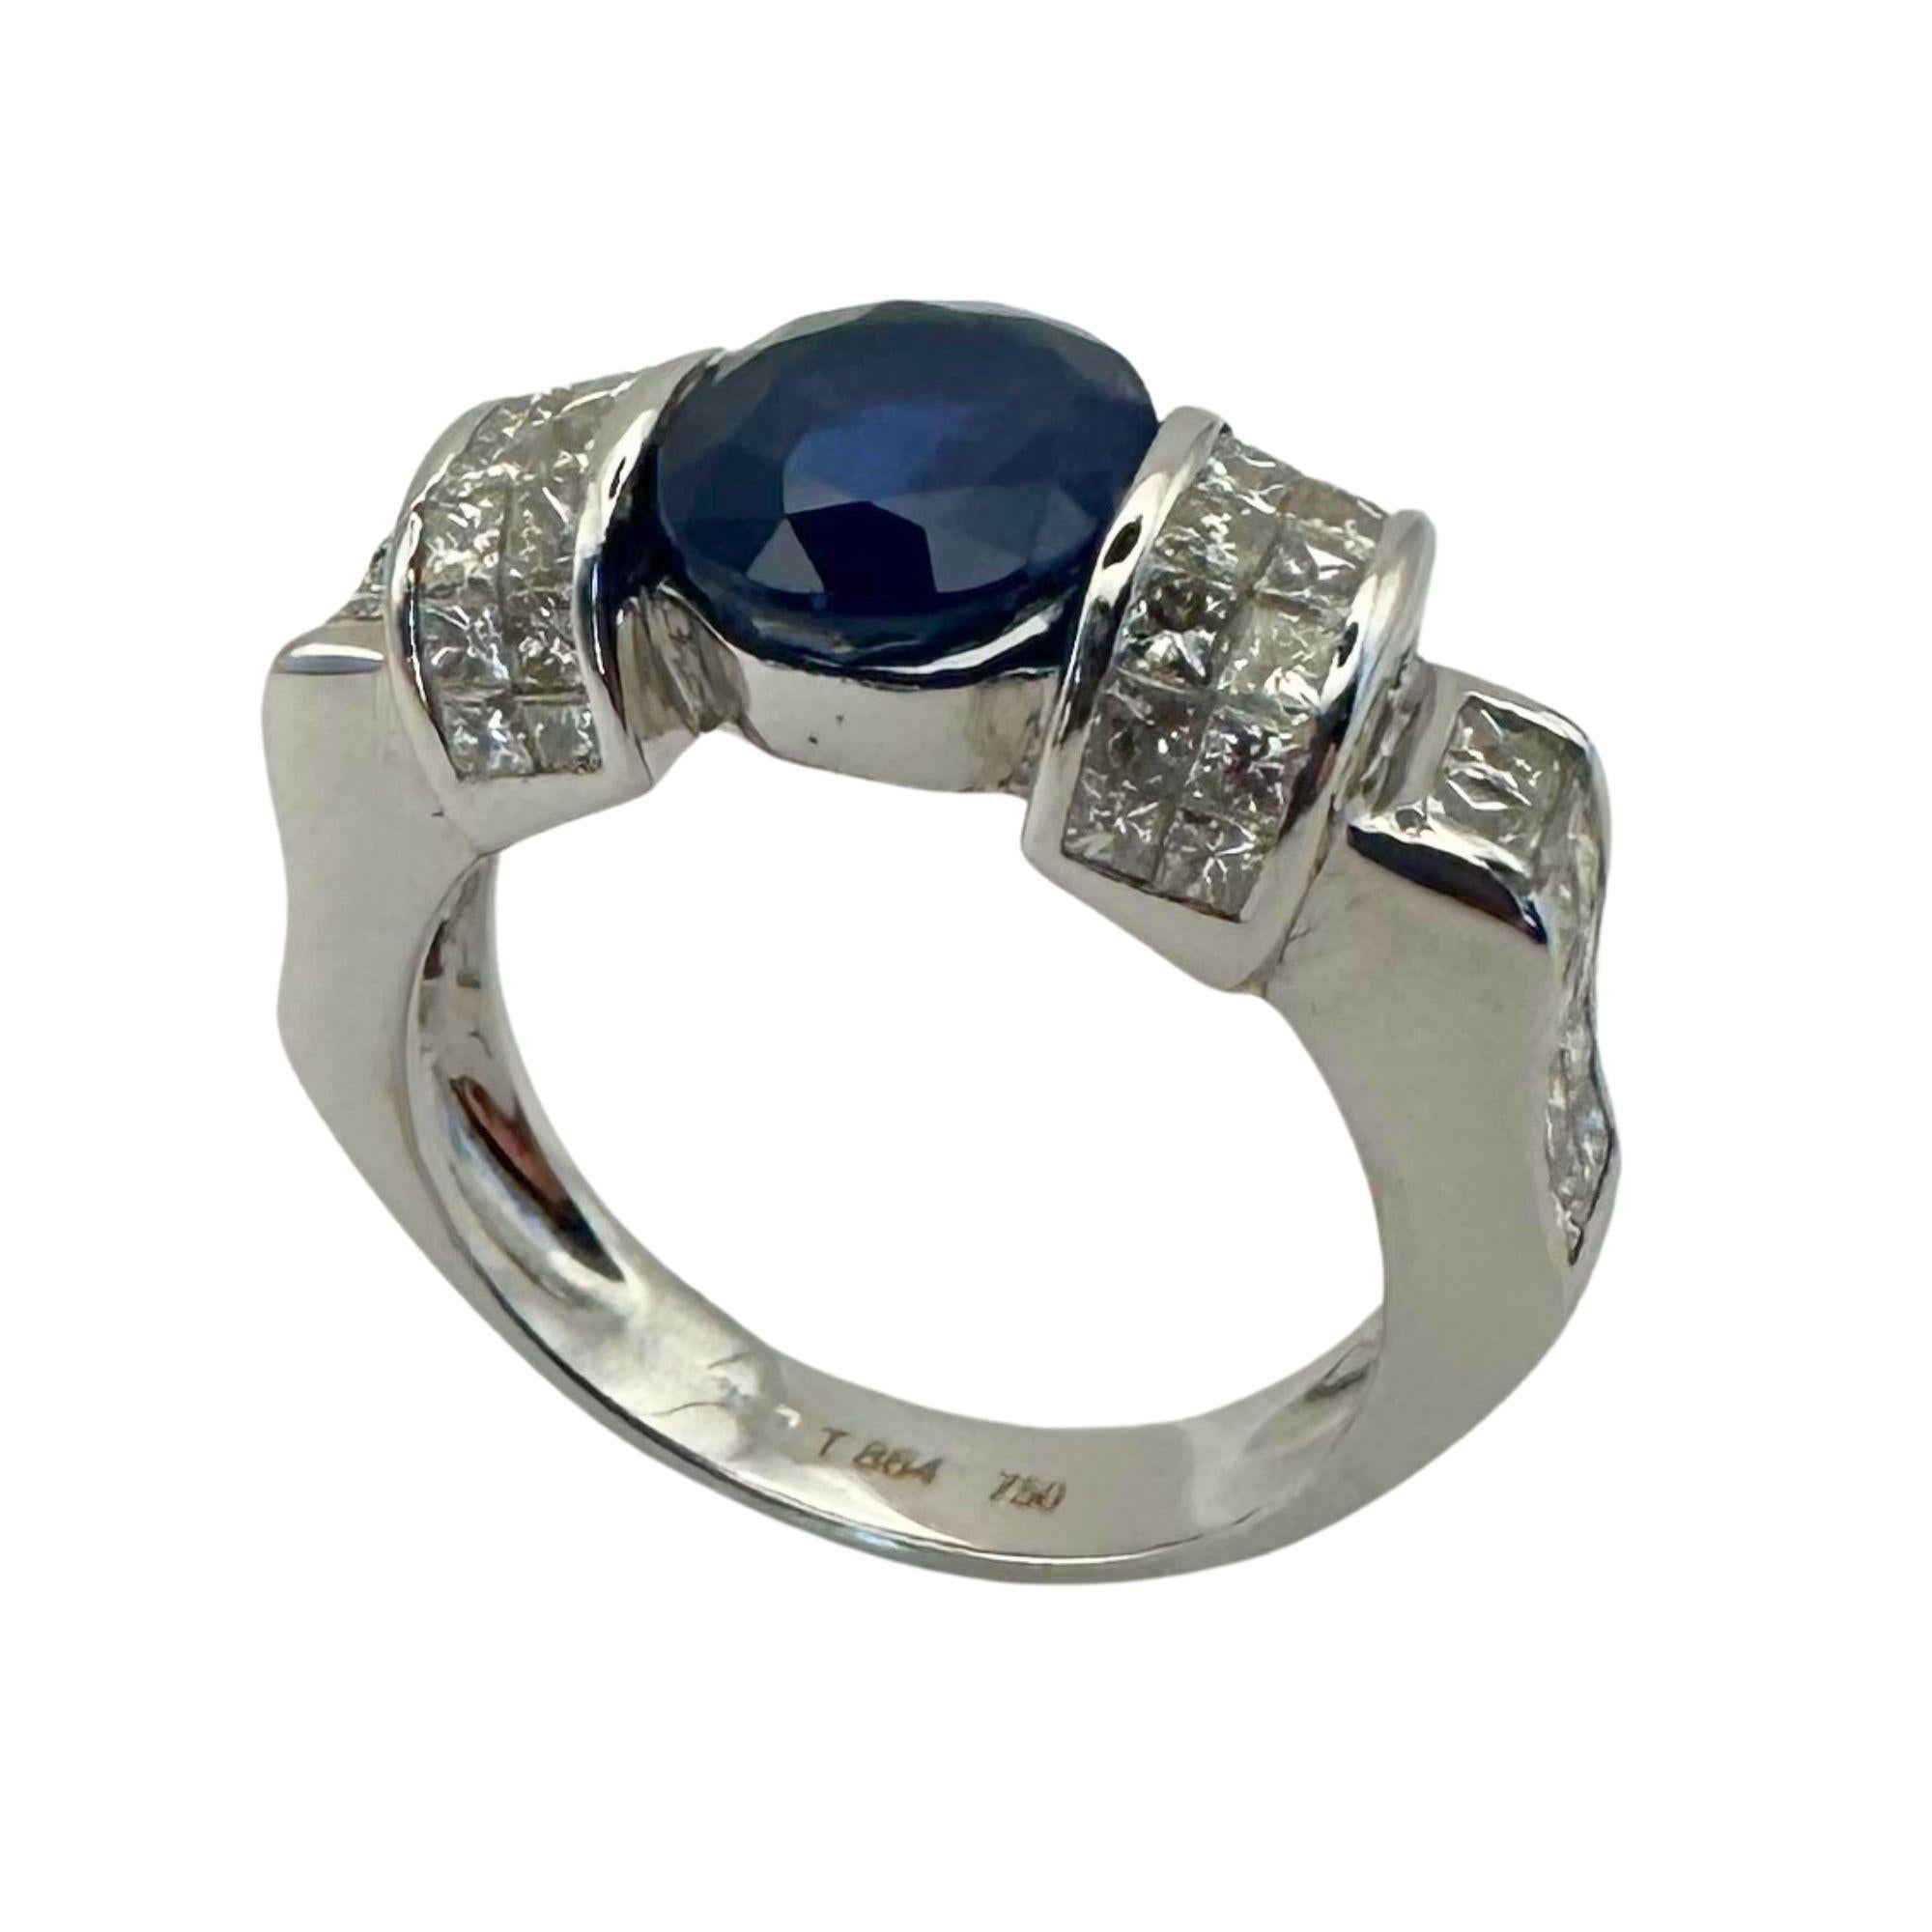 Crafted with precision and elegance, this 18k Diamond and Sapphire Ring boasts a stunning 3.32 carat sapphire at its center. Adorned with 1.94 carats of sparkling diamonds, this 5.4 gram white gold ring is a luxurious addition to any collection.